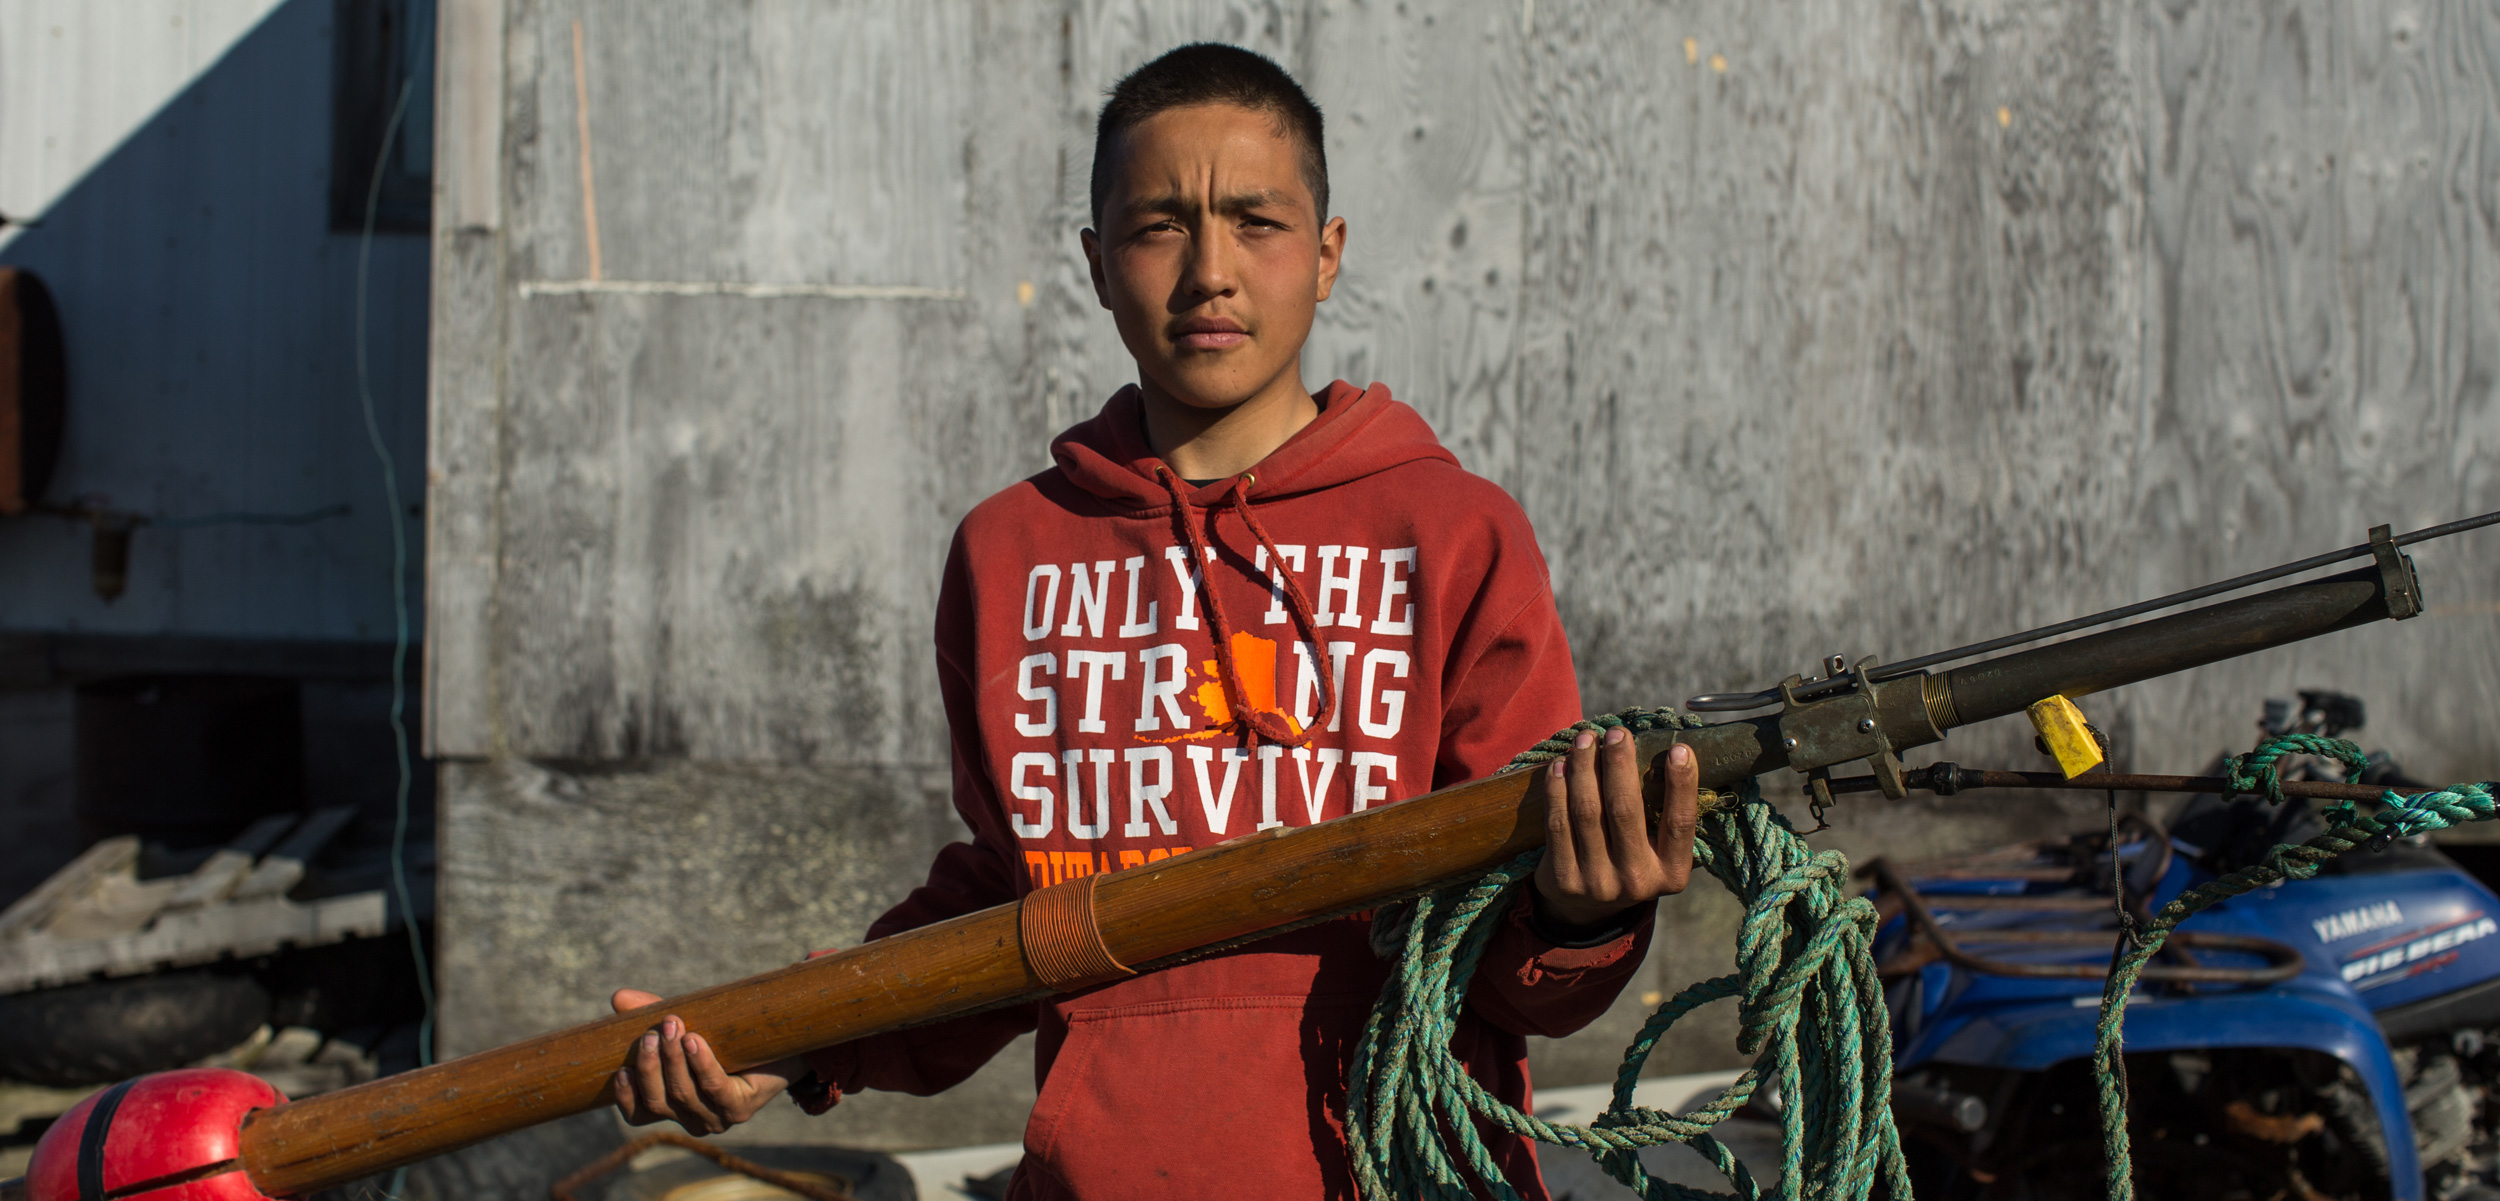 Chris Apassingok, 16, holds the darting gun he used to harpoon a whale this spring outside his family’s home in Gambell, Alaska. Photo by Ash Adams